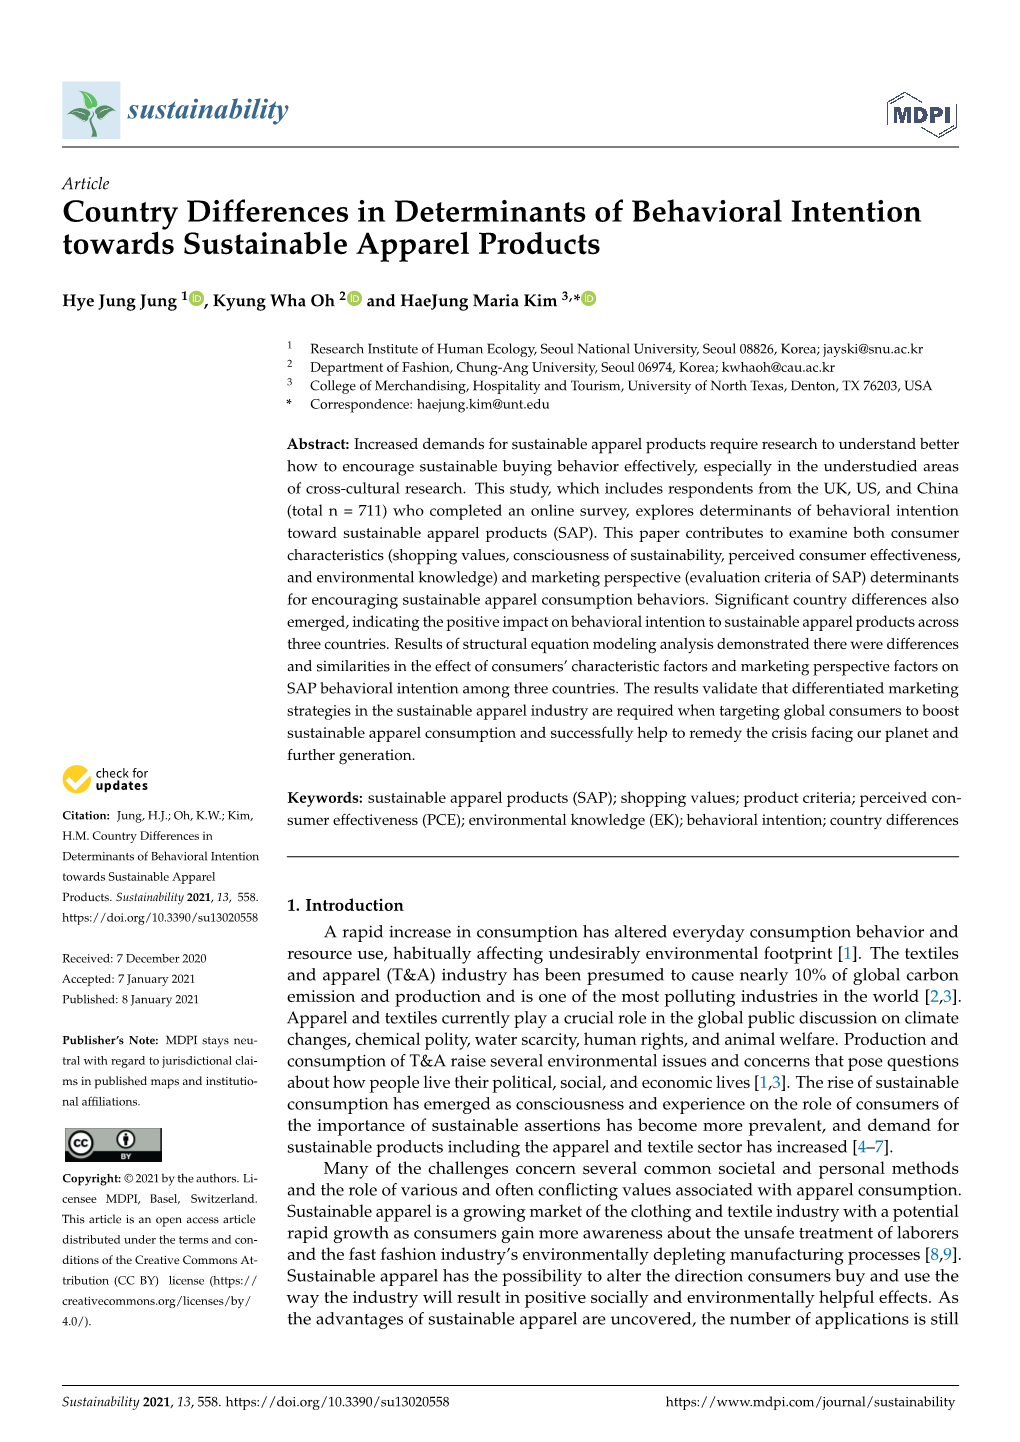 Country Differences in Determinants of Behavioral Intention Towards Sustainable Apparel Products